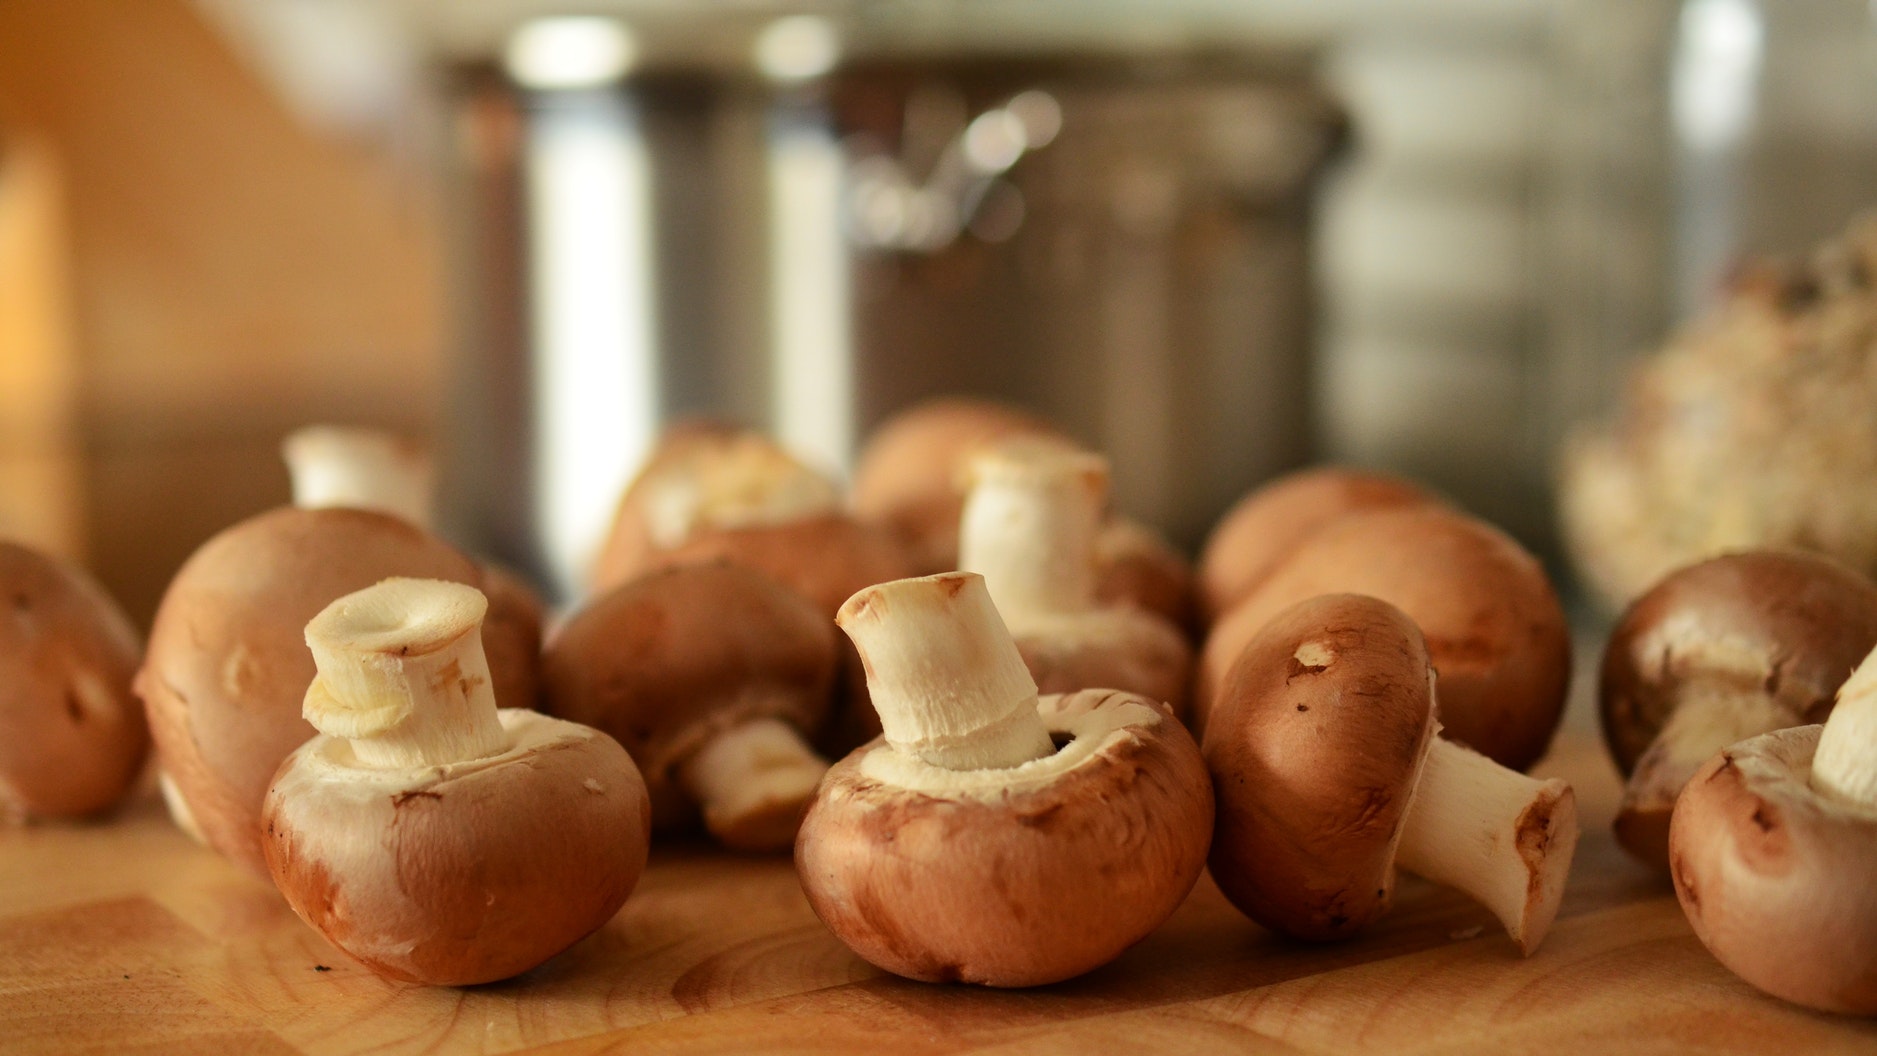 Best Mushroom Supplements in the Market for a Keto Diet